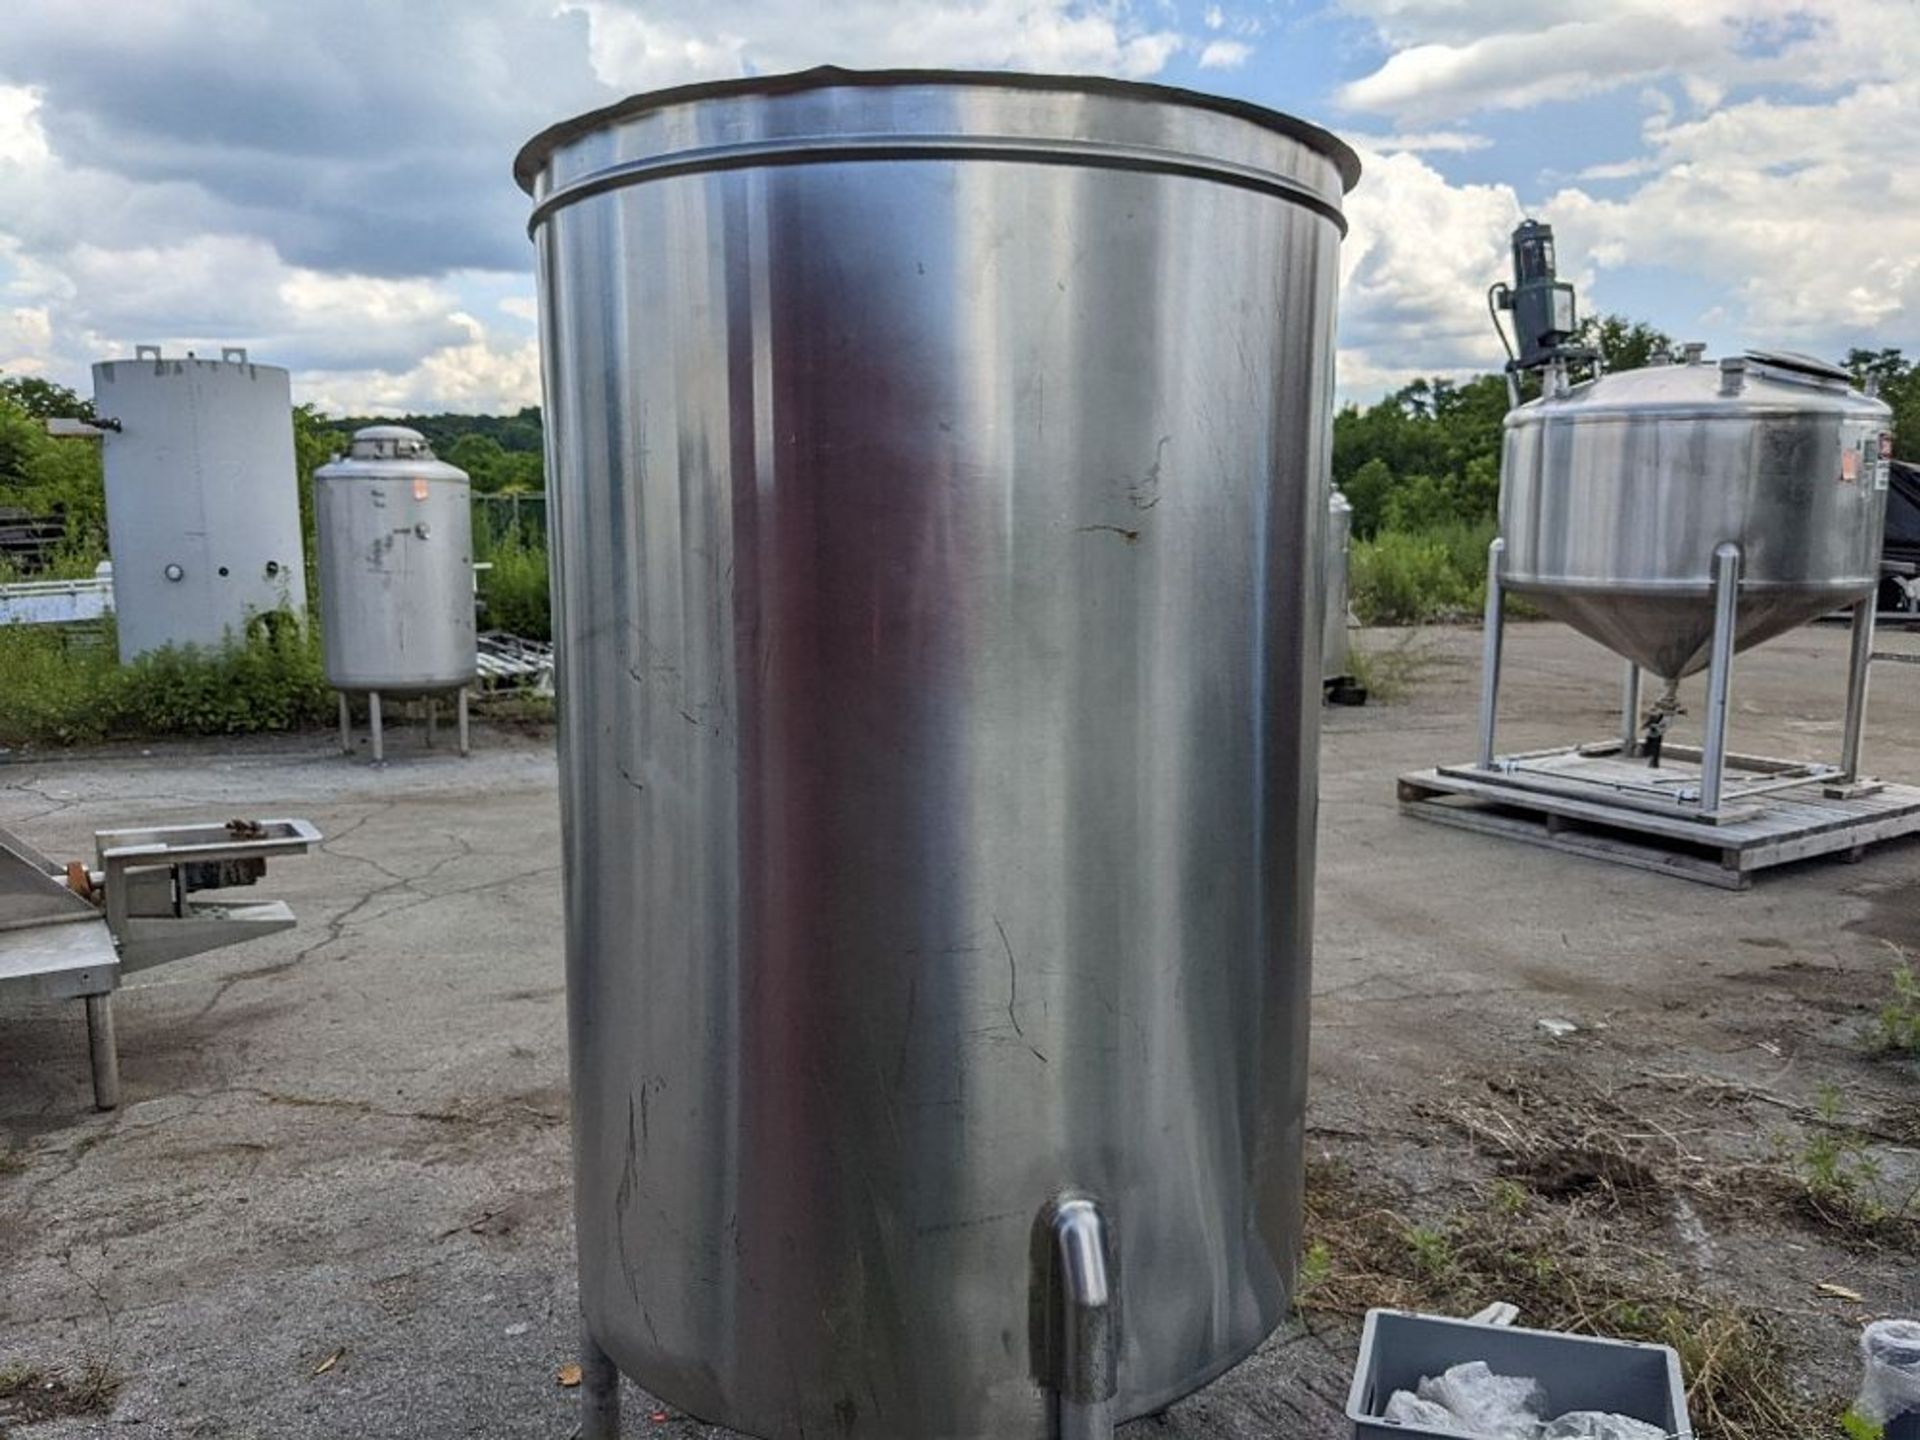 Qty (1) Potter and Rayfield Single Wall Vertical Agitated Stainless Steel Tank 312 Gallon - Open top